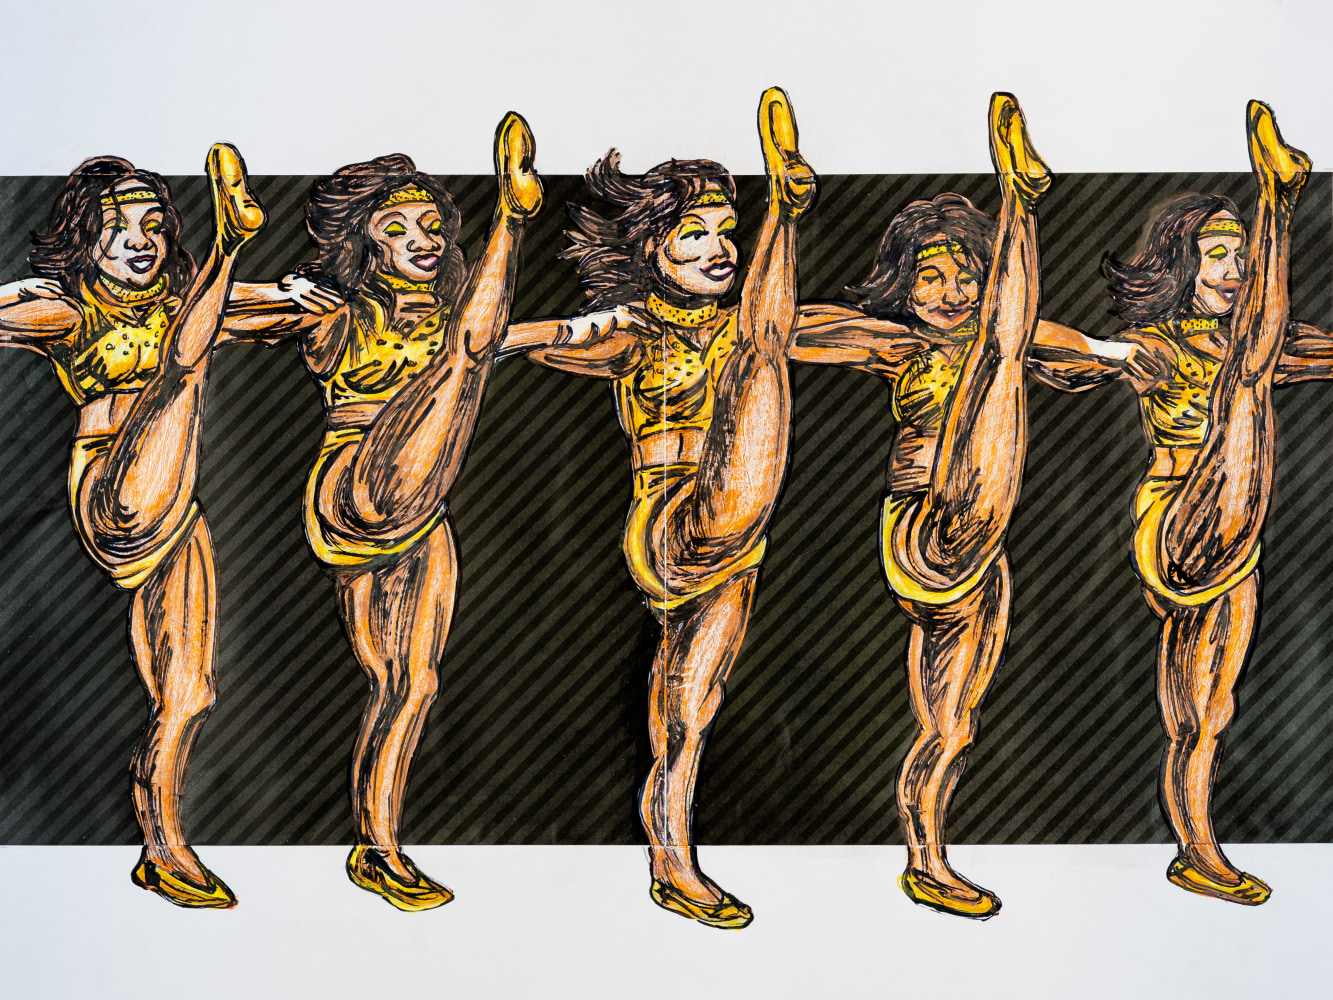 Keith Duncan
Grambling State University Dance Team 2, 2020
Colored pencil and marker on paper
18 x 24 inches&amp;nbsp;